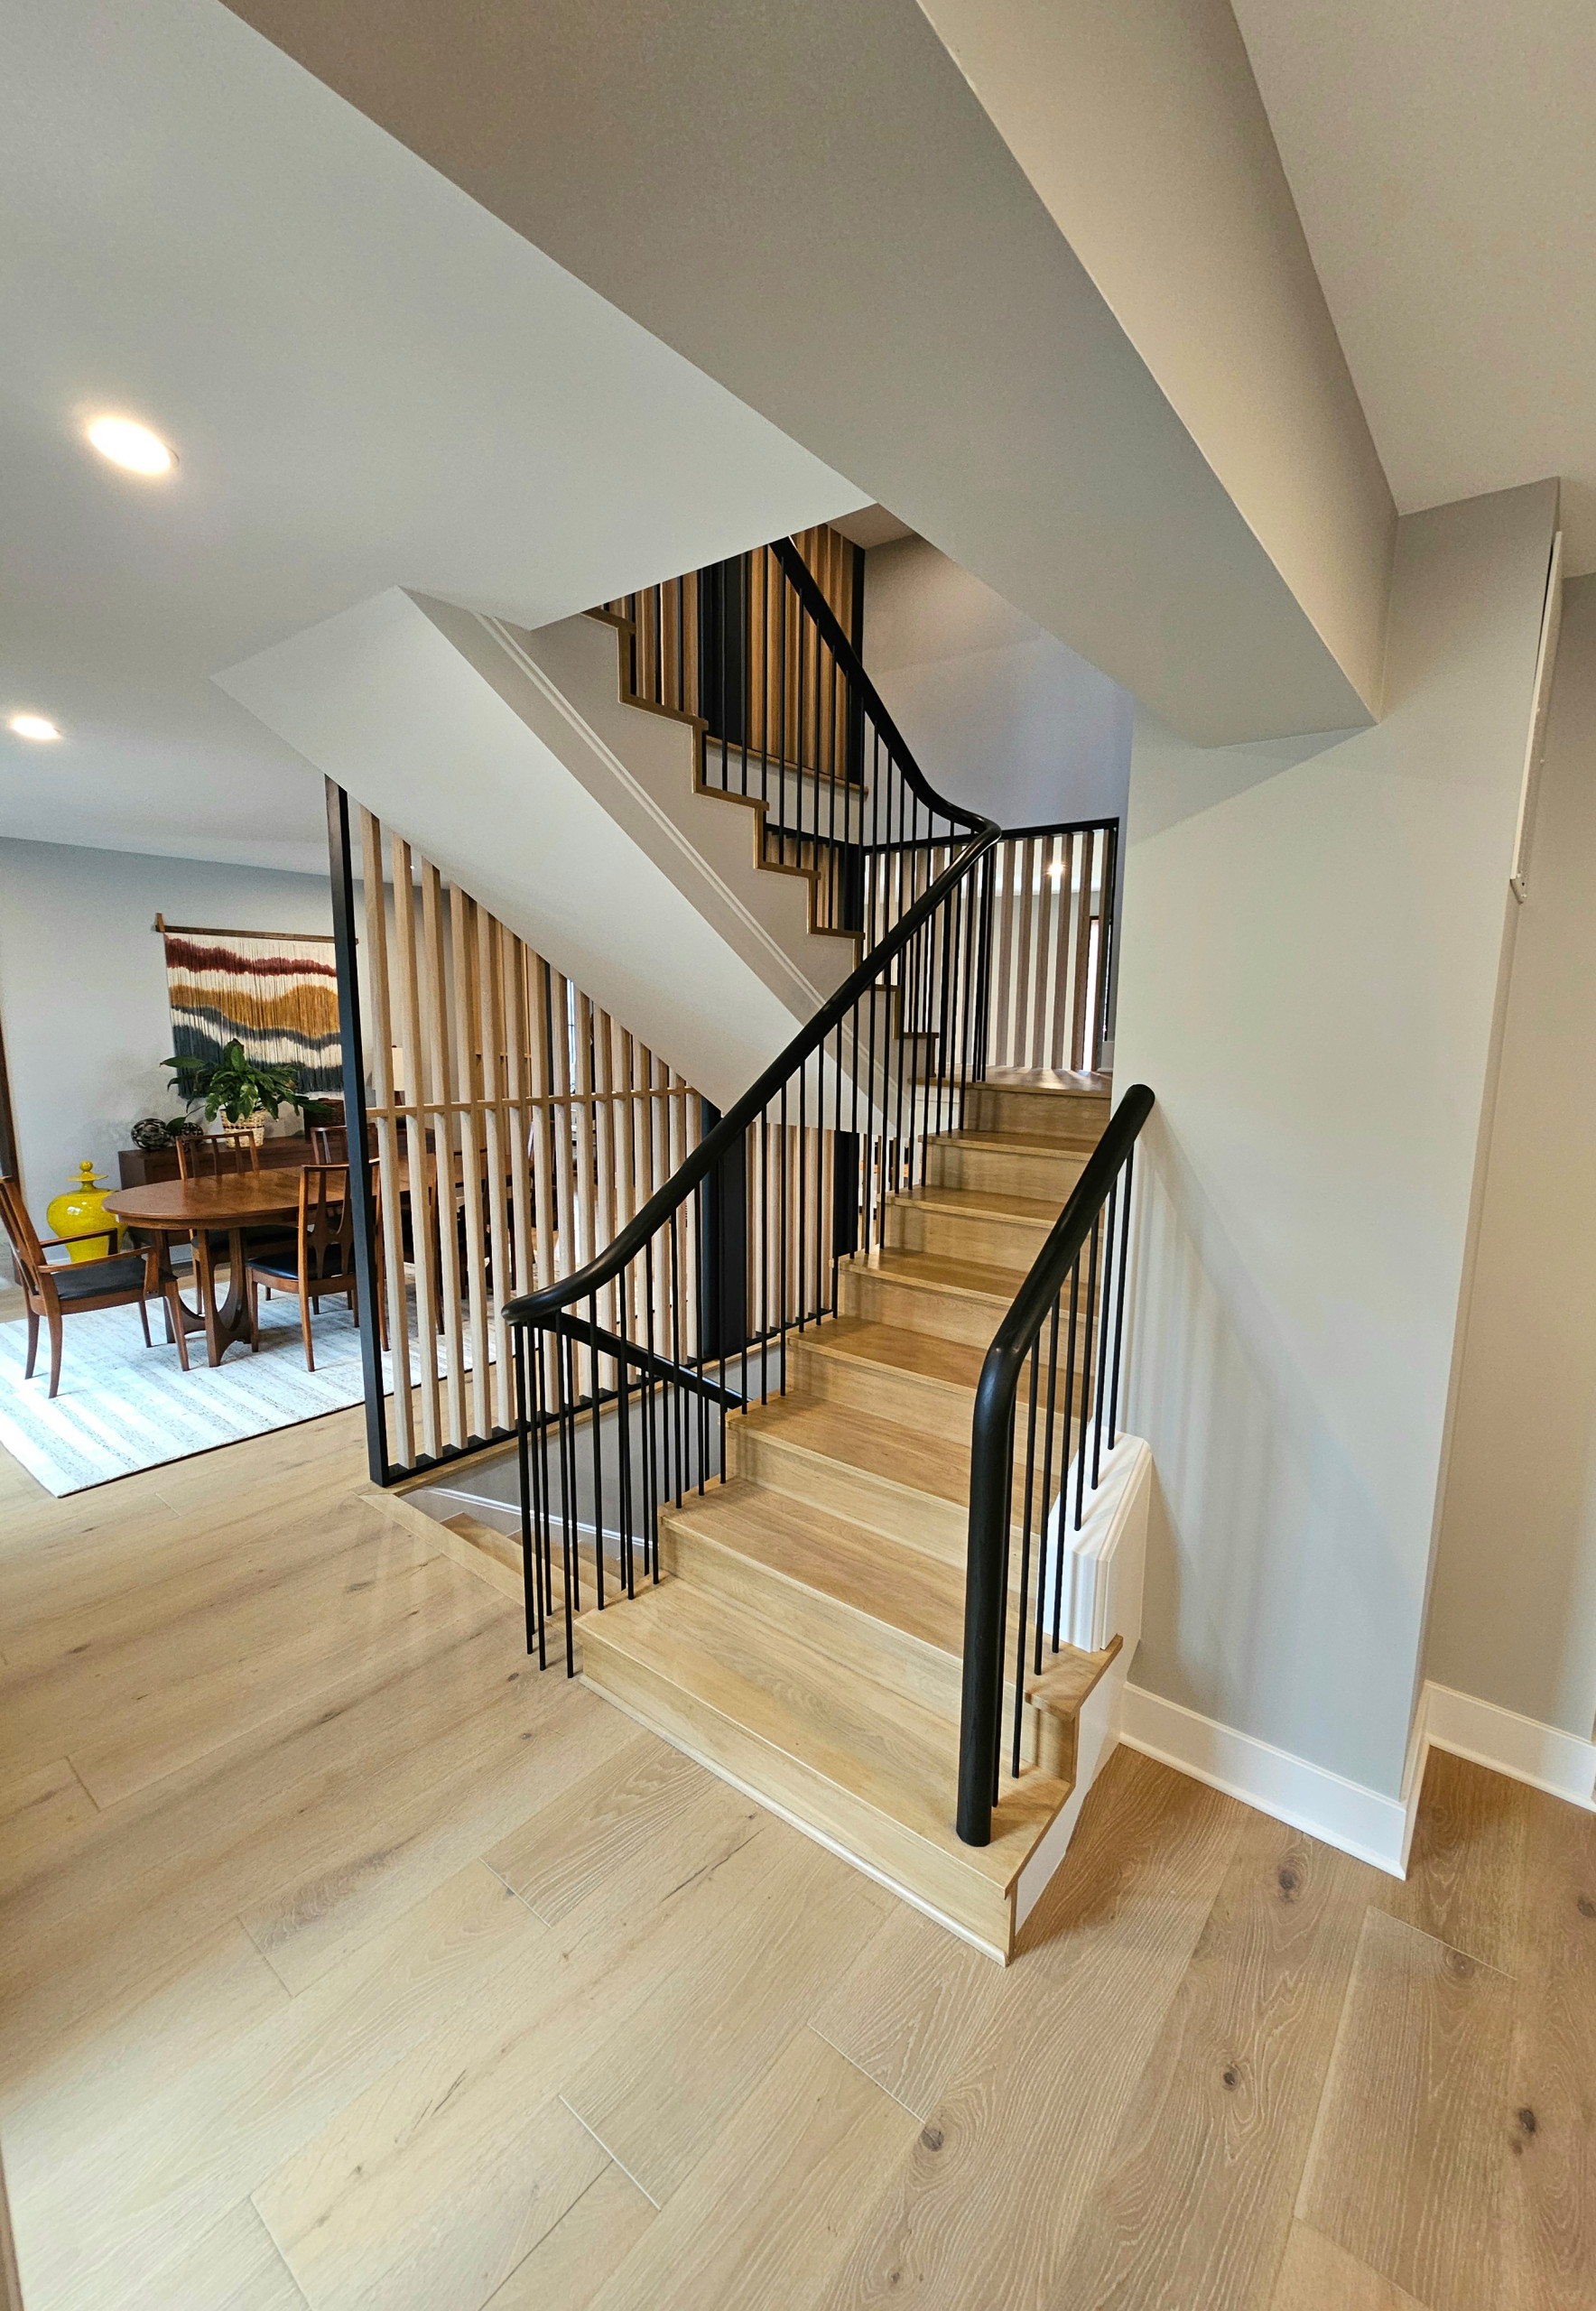 115_Stunning Continuous Rail System on 3 Story Floating Stairs; Arlington, VA 22